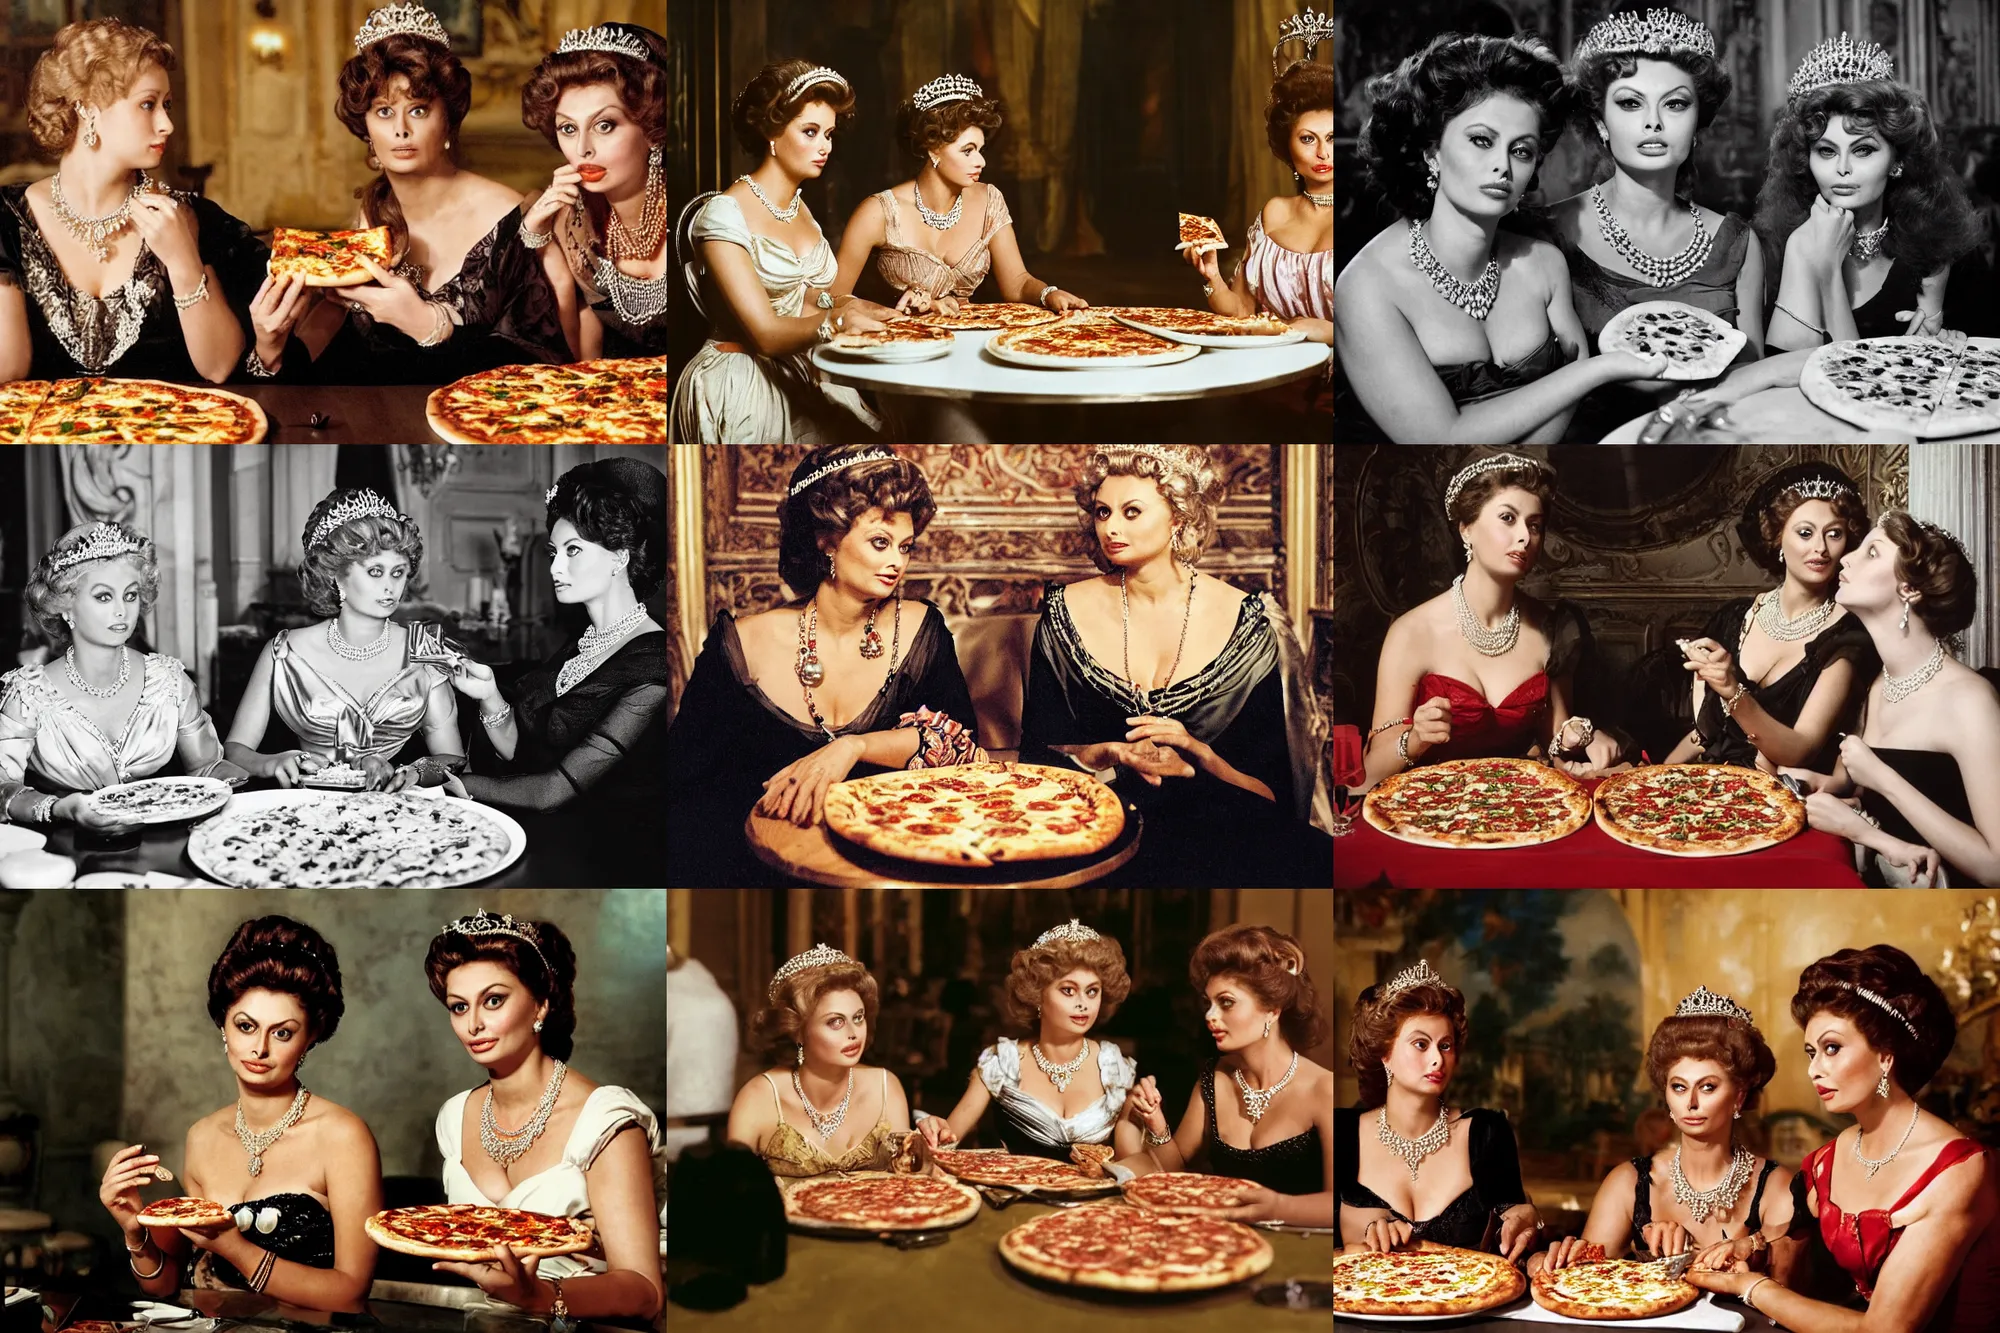 Prompt: a highly detailed photo of two young beautiful women sitting at a long take sharing a pizza margherita, queen margherita of savoy with tiara and pearl necklace, and sophia loren with black flowing hair, smooth lighting, masterpiece, timeless, photography by richard jenkins